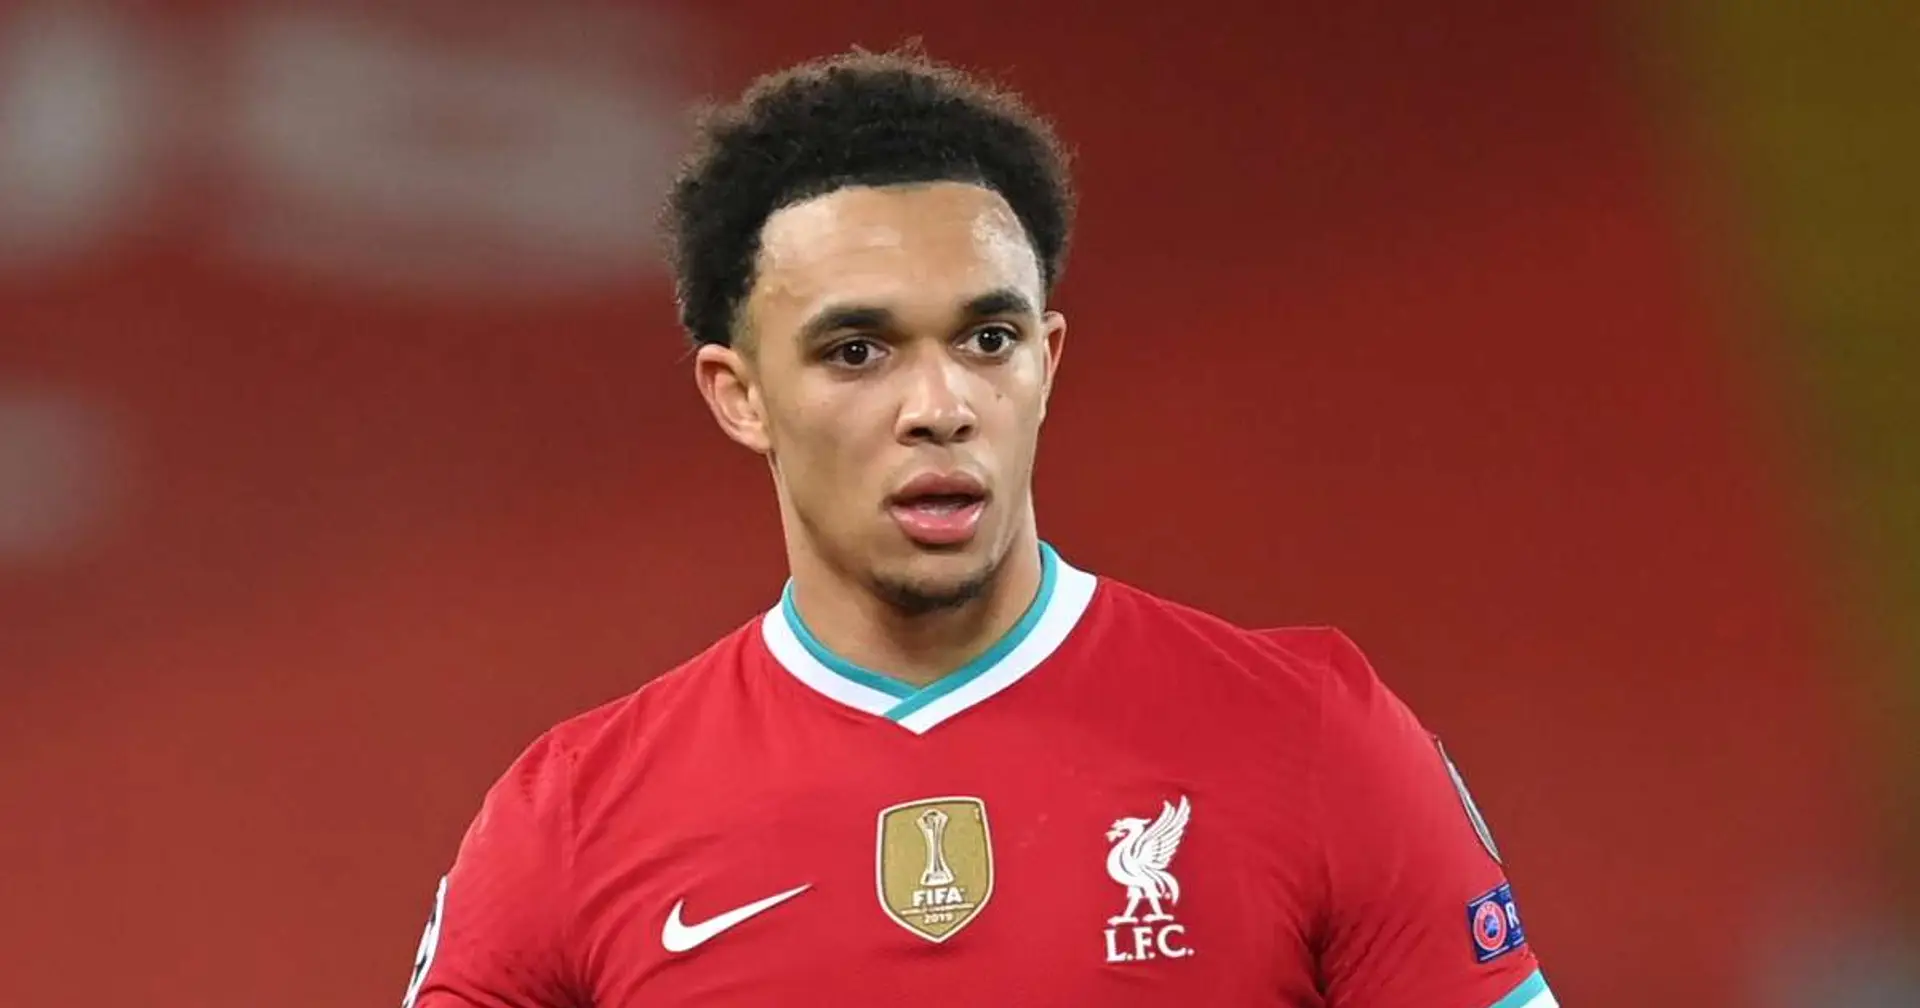 Trent Alexander-Arnold takes just 10 minutes after recovery to mastermind a goal